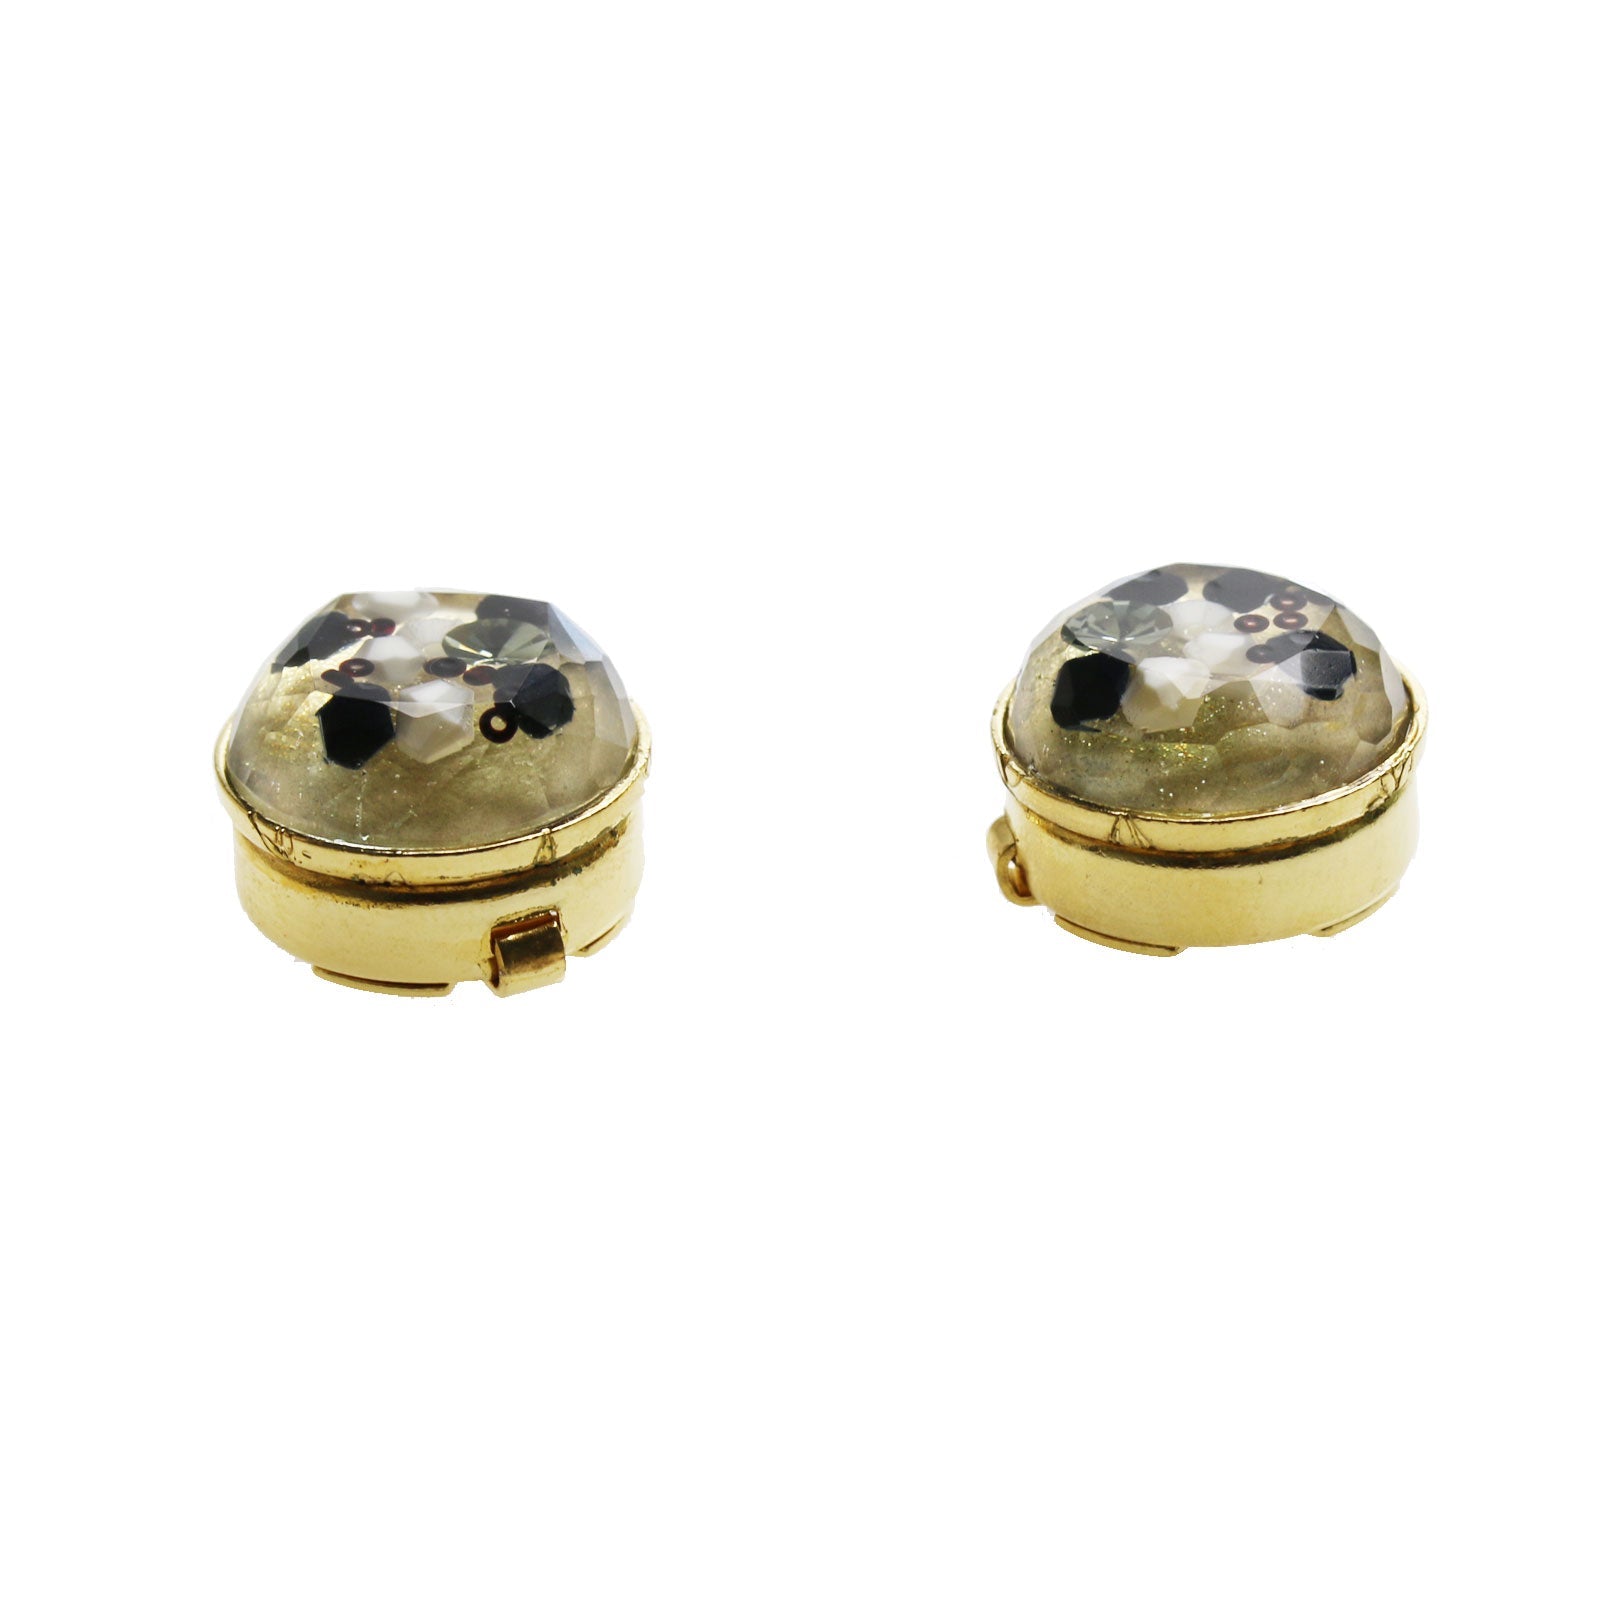 Button Cover Beads Black And White Resin Cufflinks TAMARUSAN